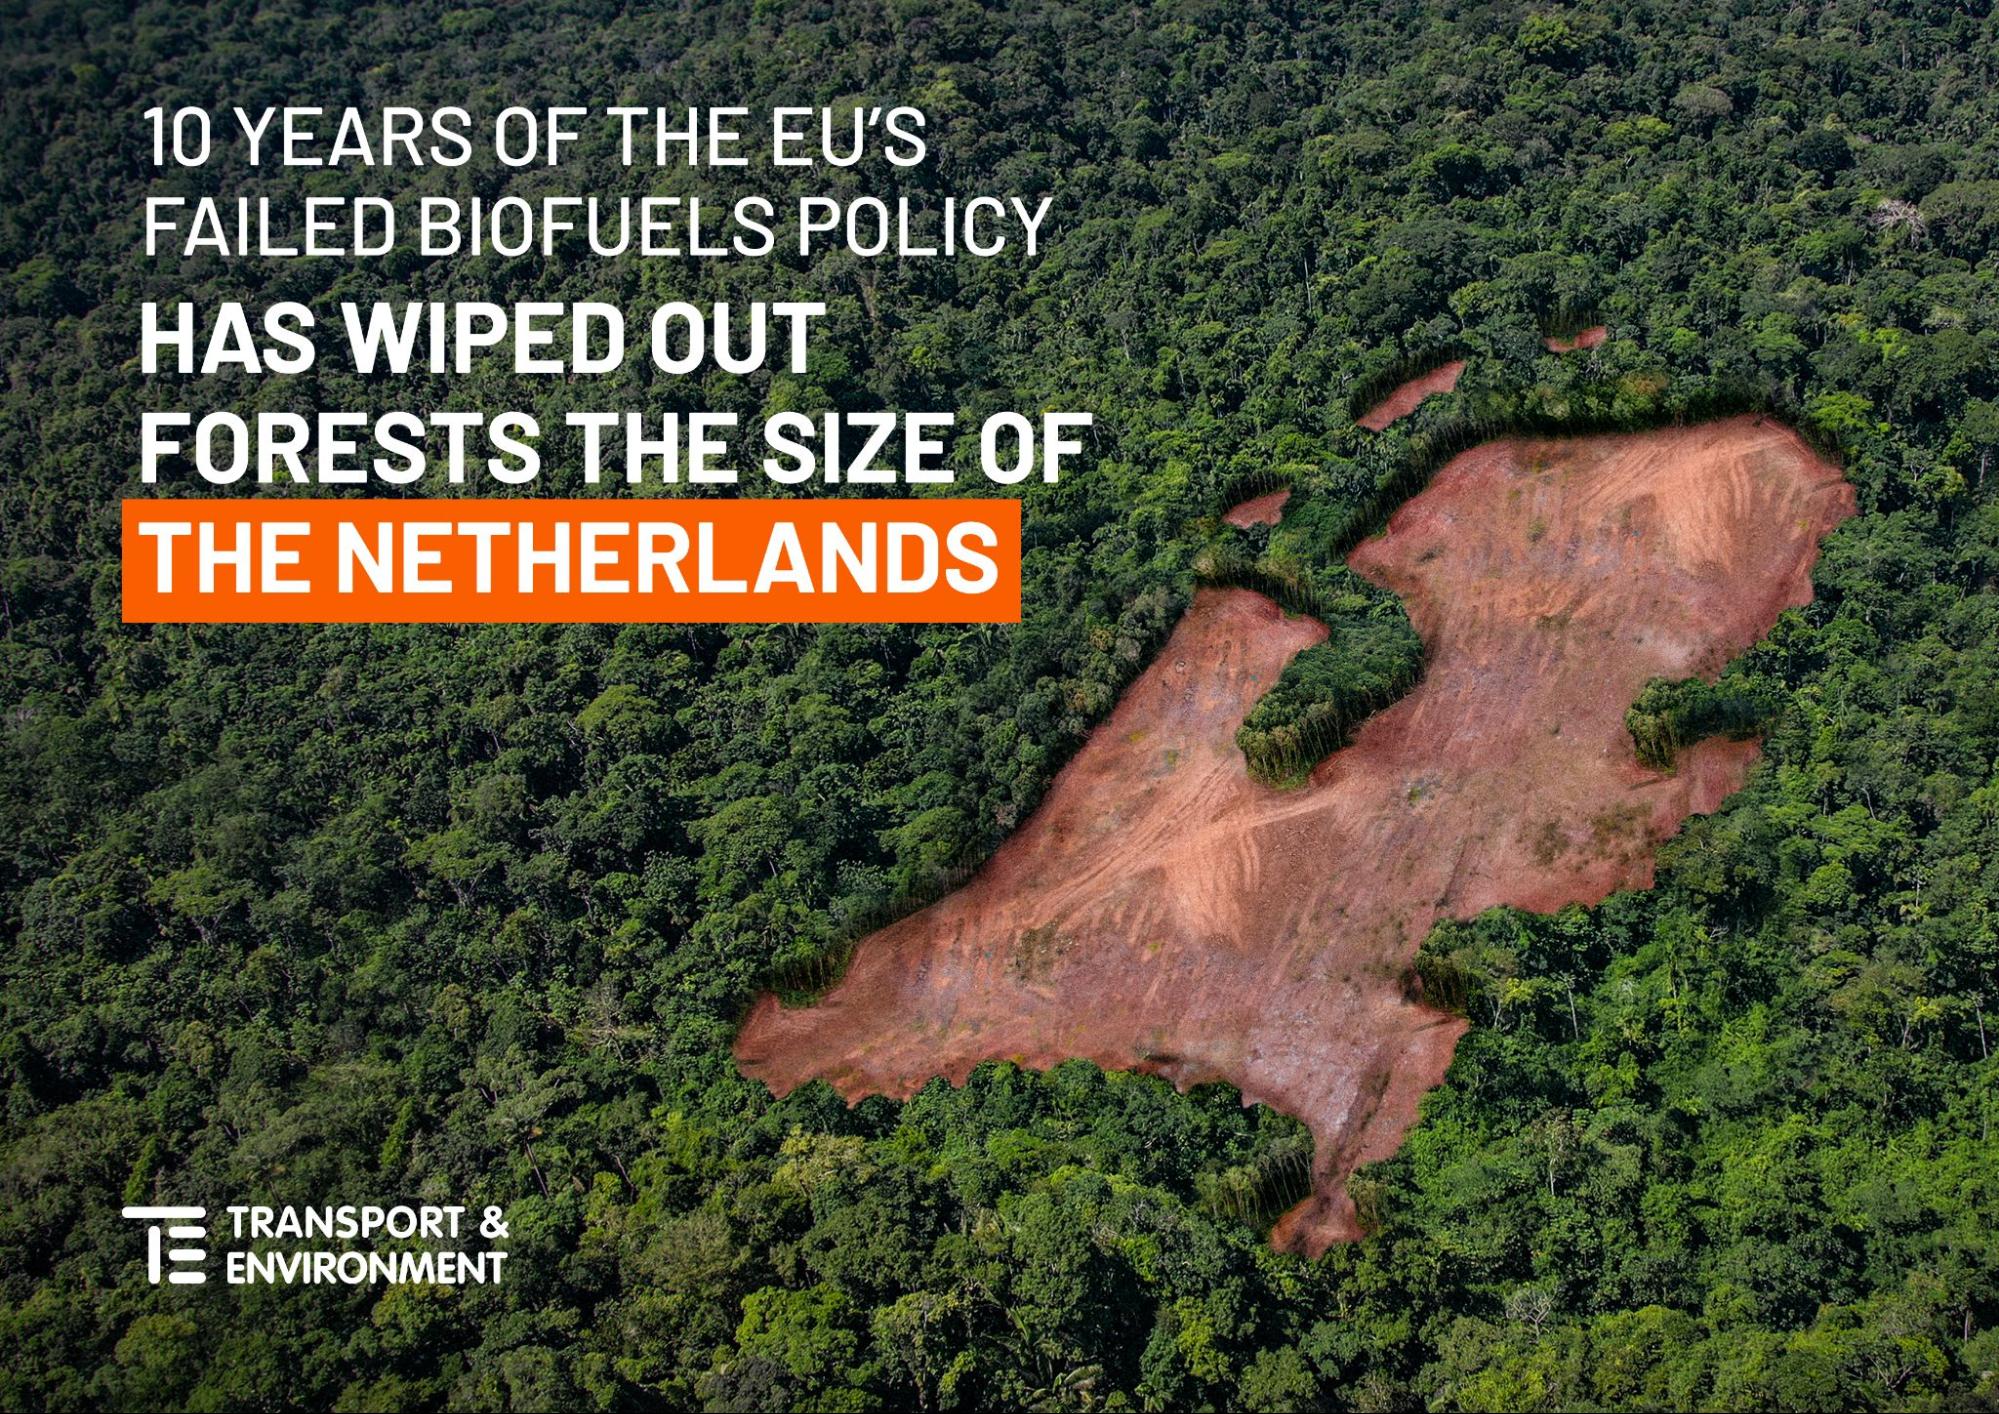 10 years of the EUs failed biofuels policy has wiped out forestes the size of the Netherlands